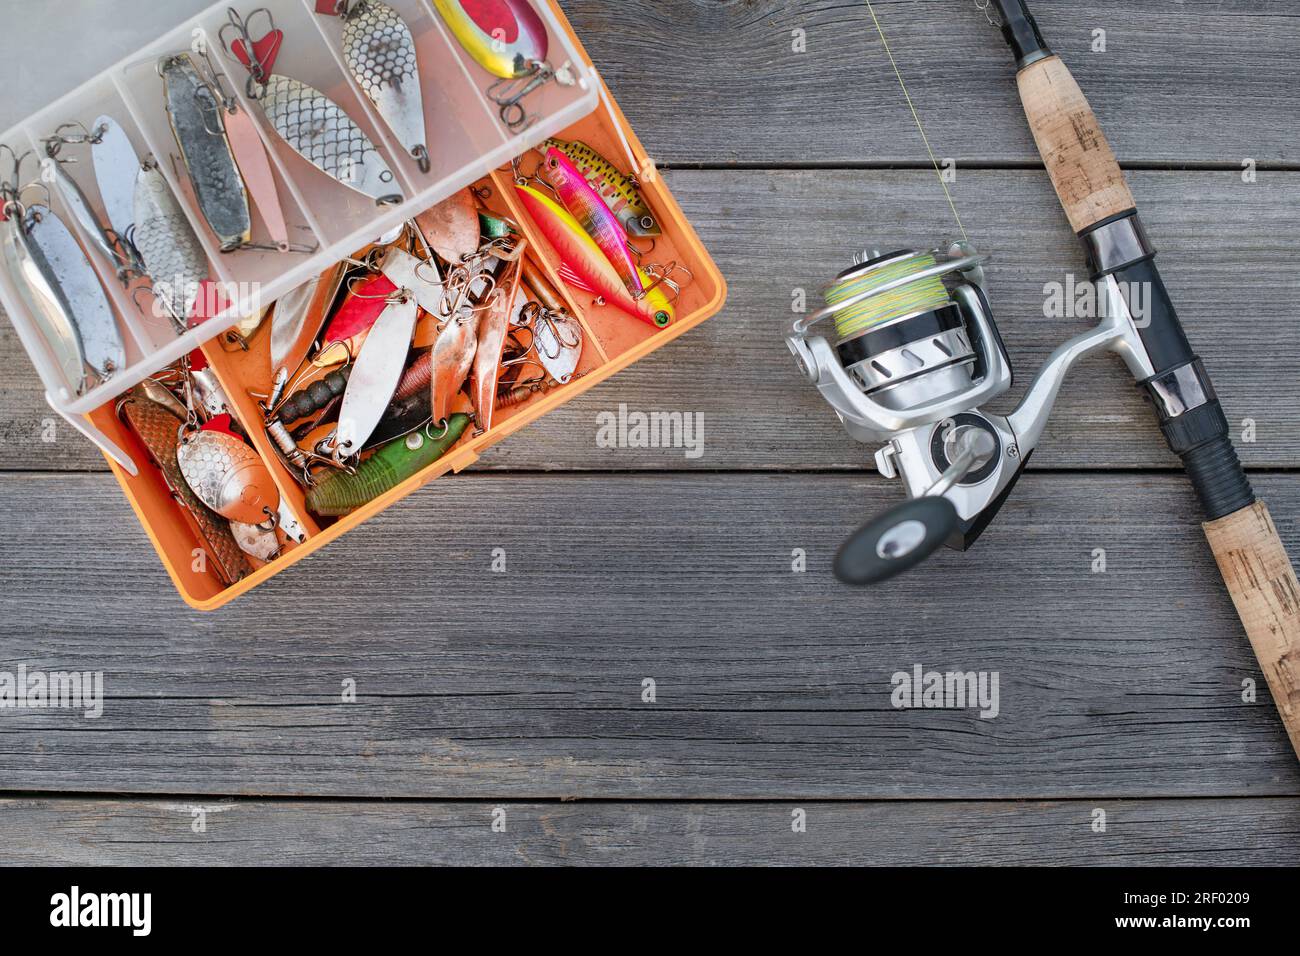 A fishing tackle box, complete with lures and fishing gear on a